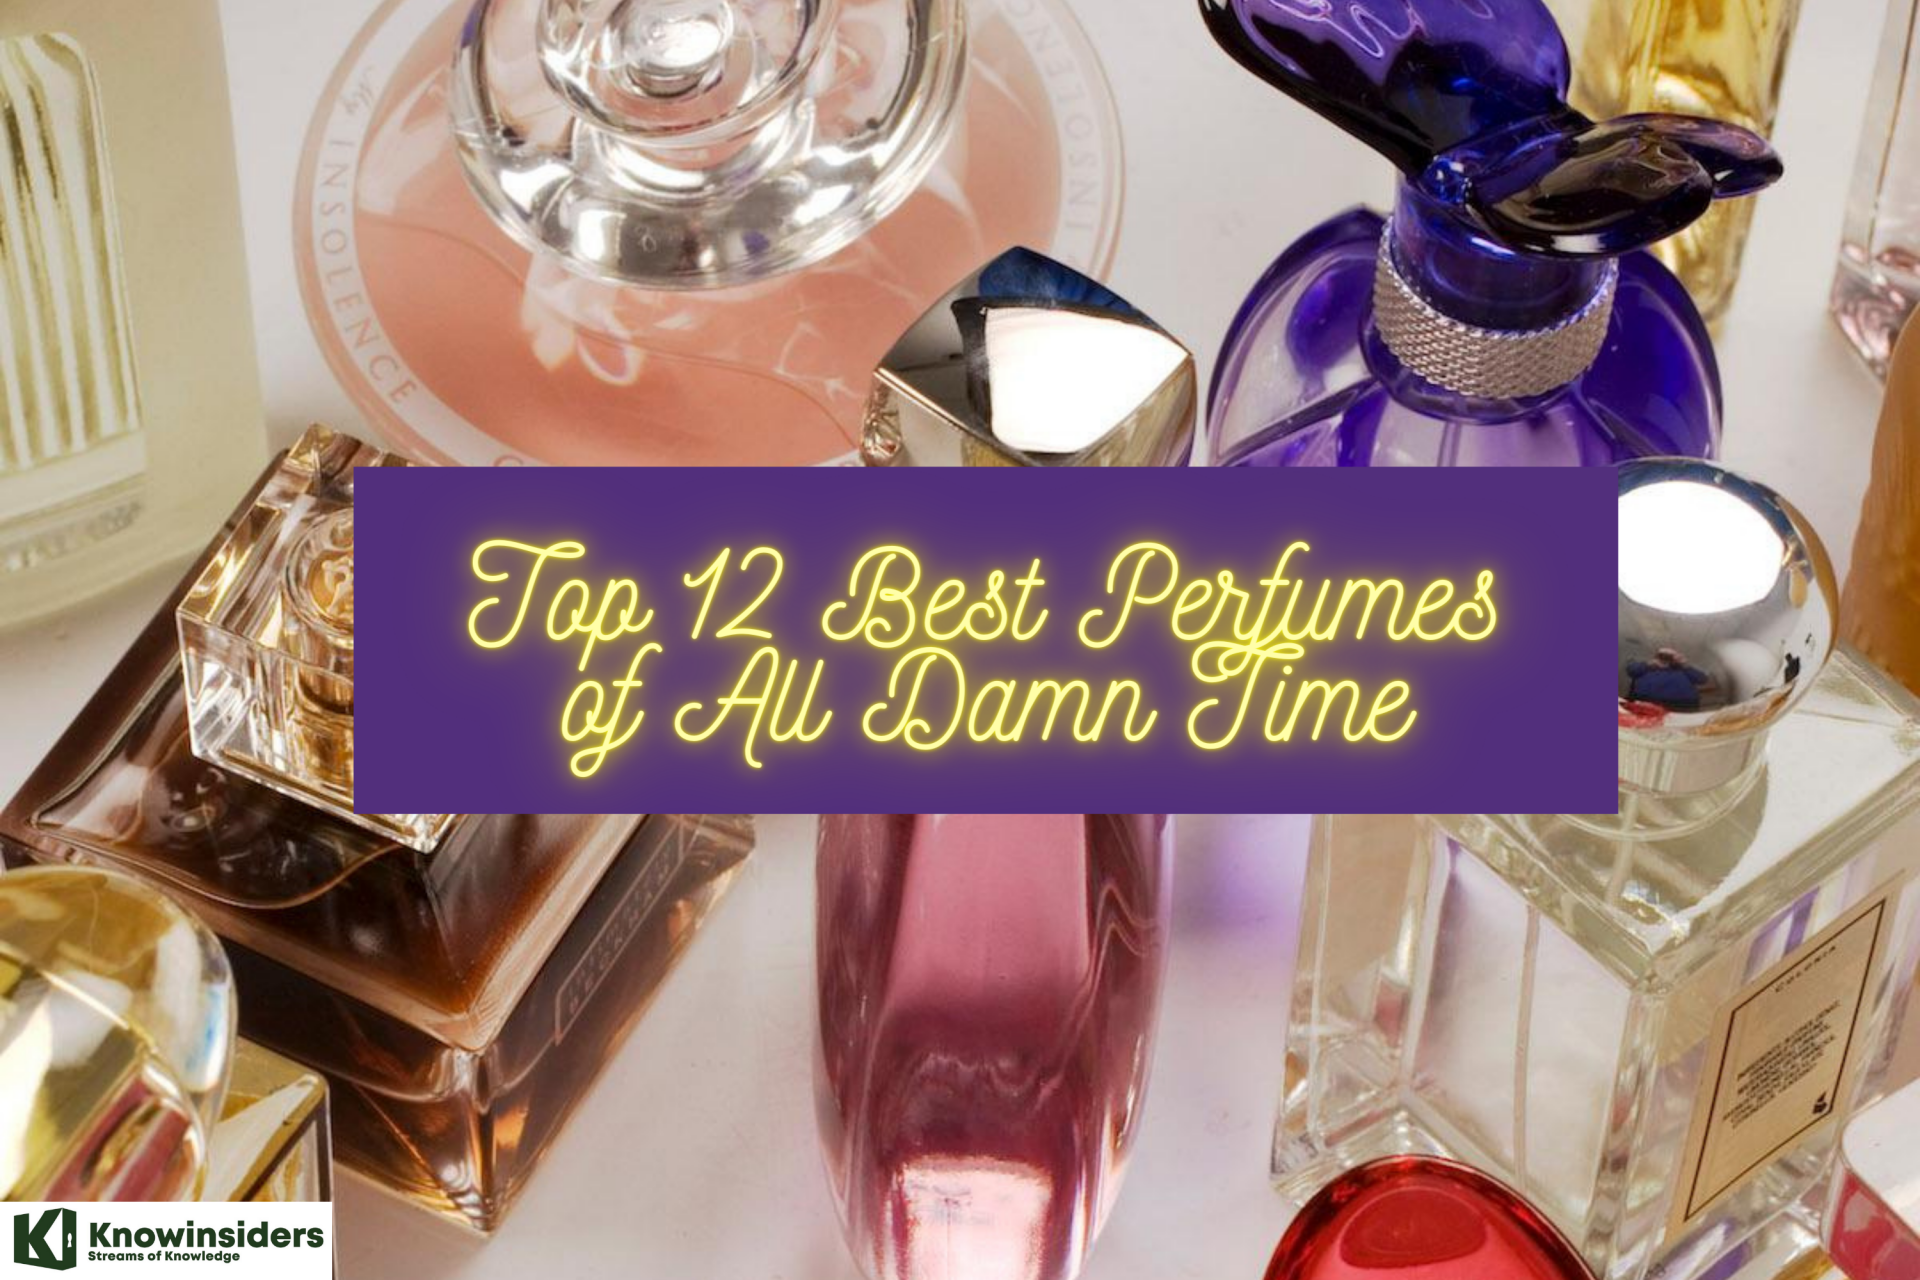 Top 12 Best Perfumes of All Time